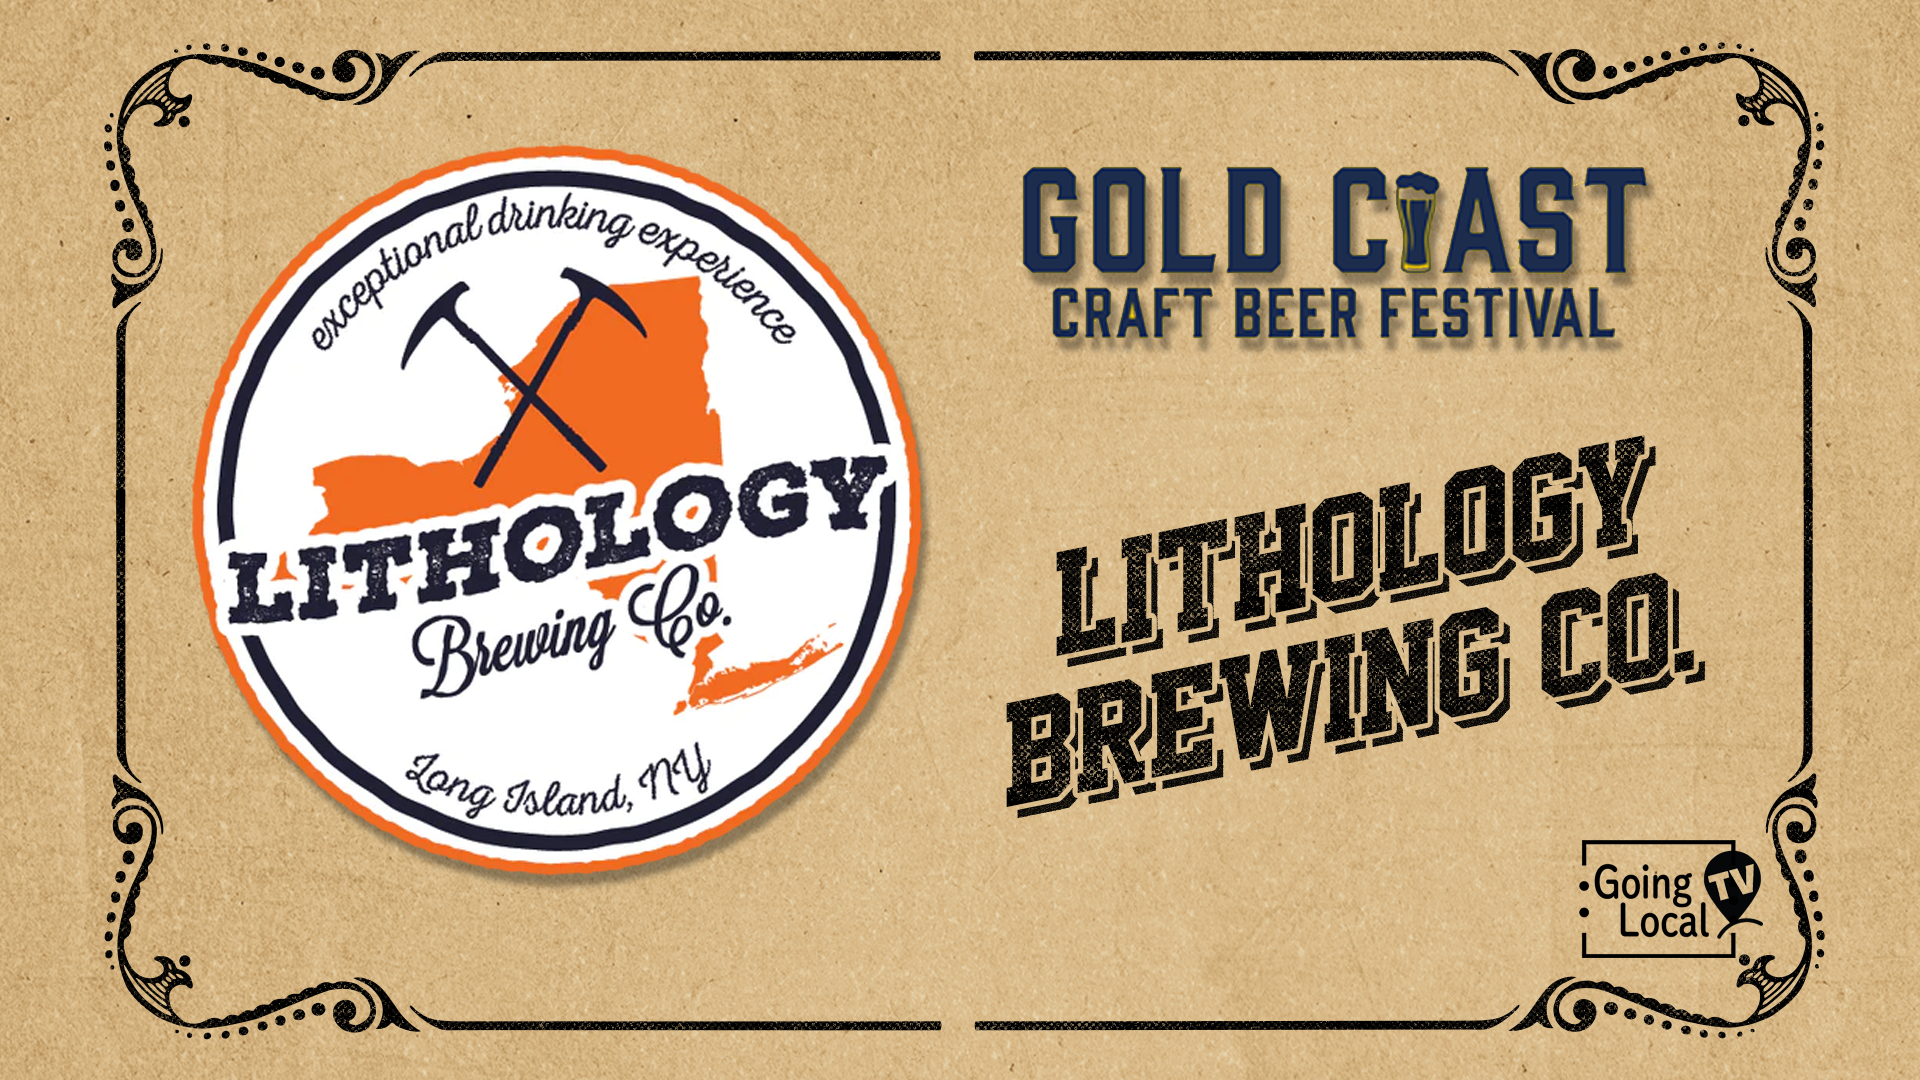 Lithology Brewing Co. - 2nd Gold Coast Craft Beer Festival